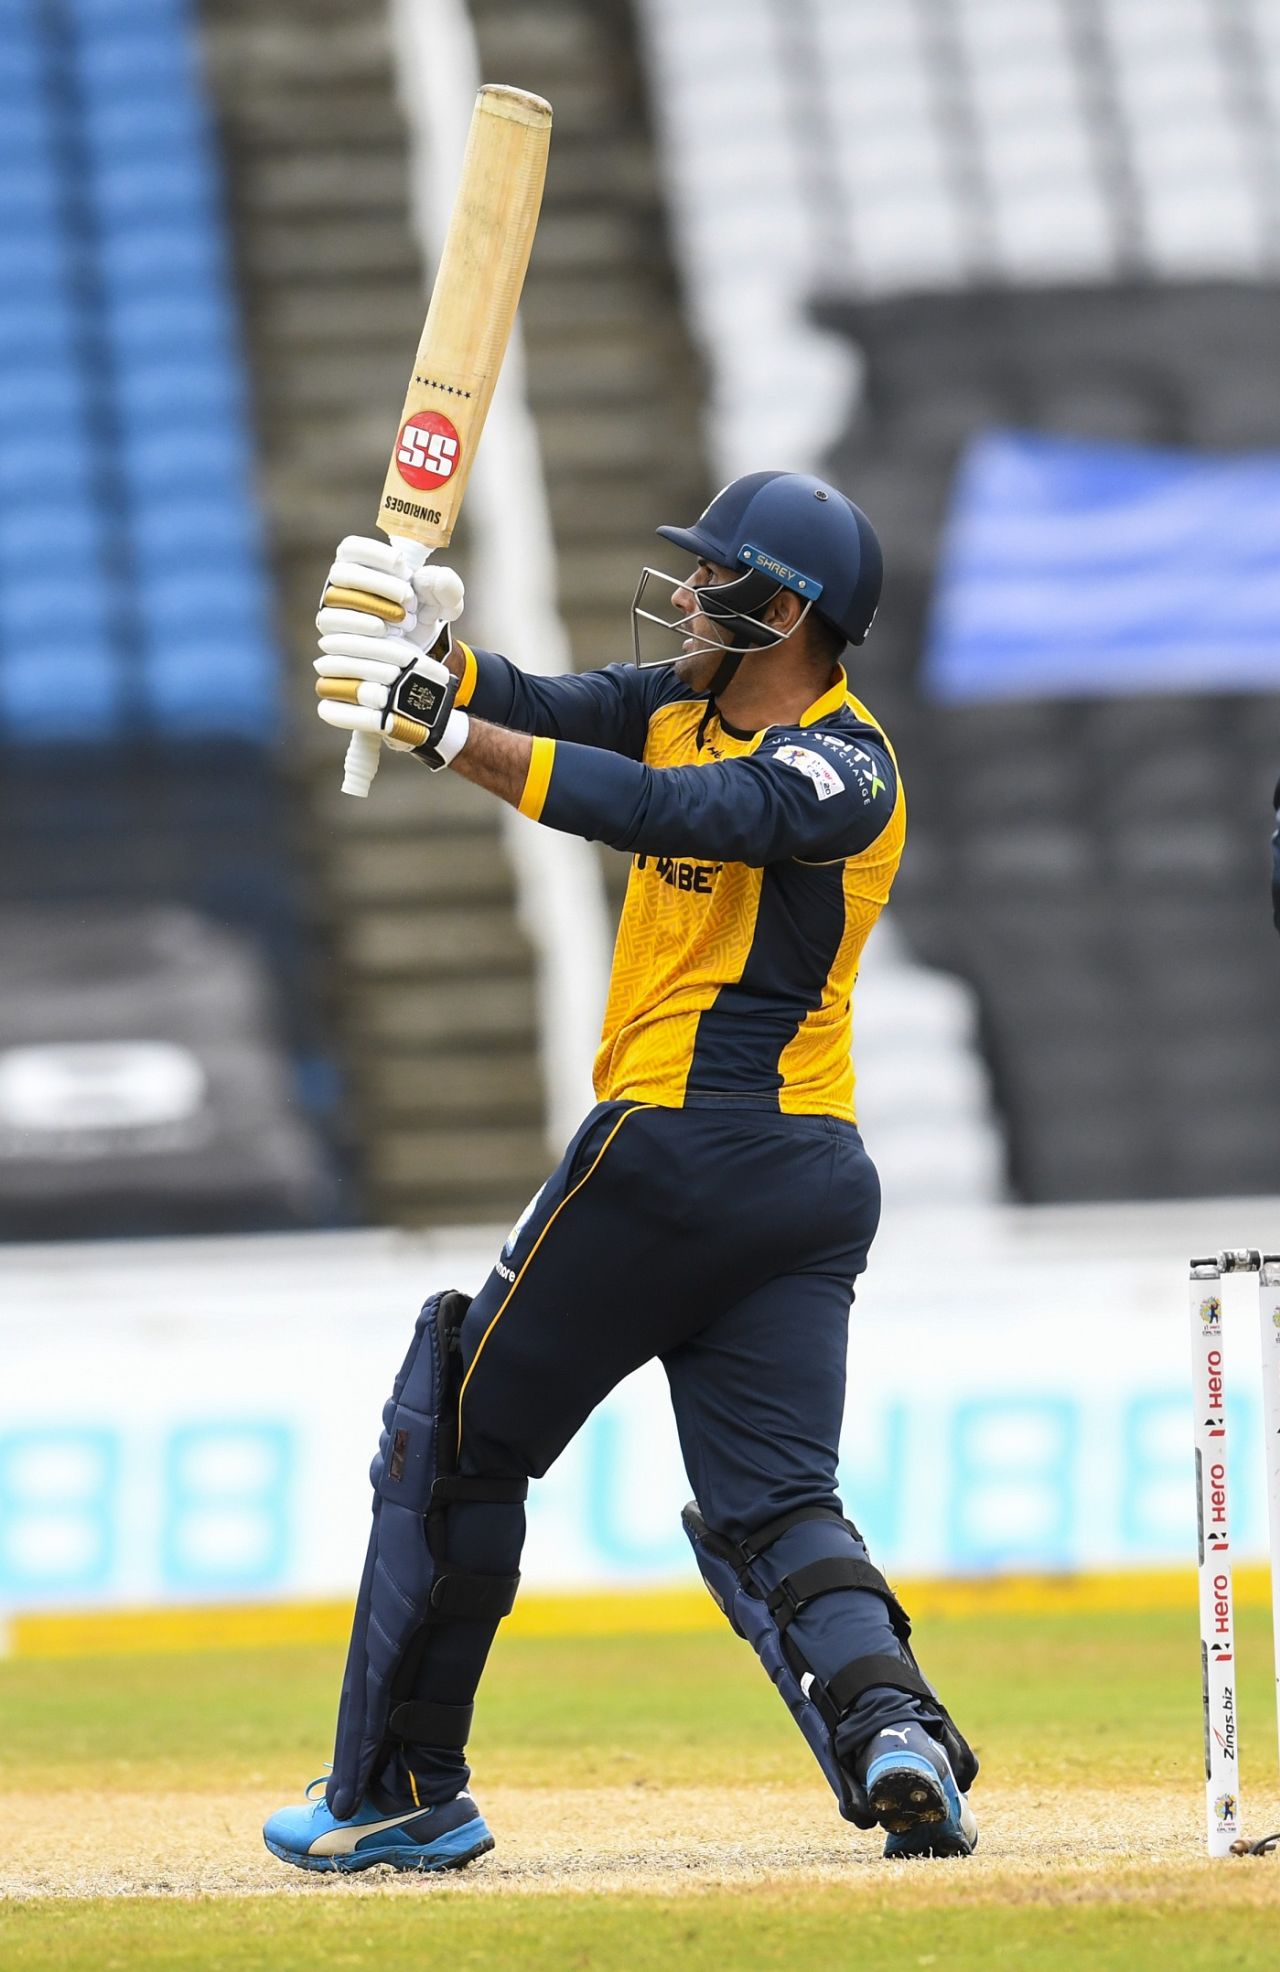 Mohamad Nabi struck a couple of meaty blows, Barbados Tridents v St Lucia Zouks, CPL 2020, August 20, 2020